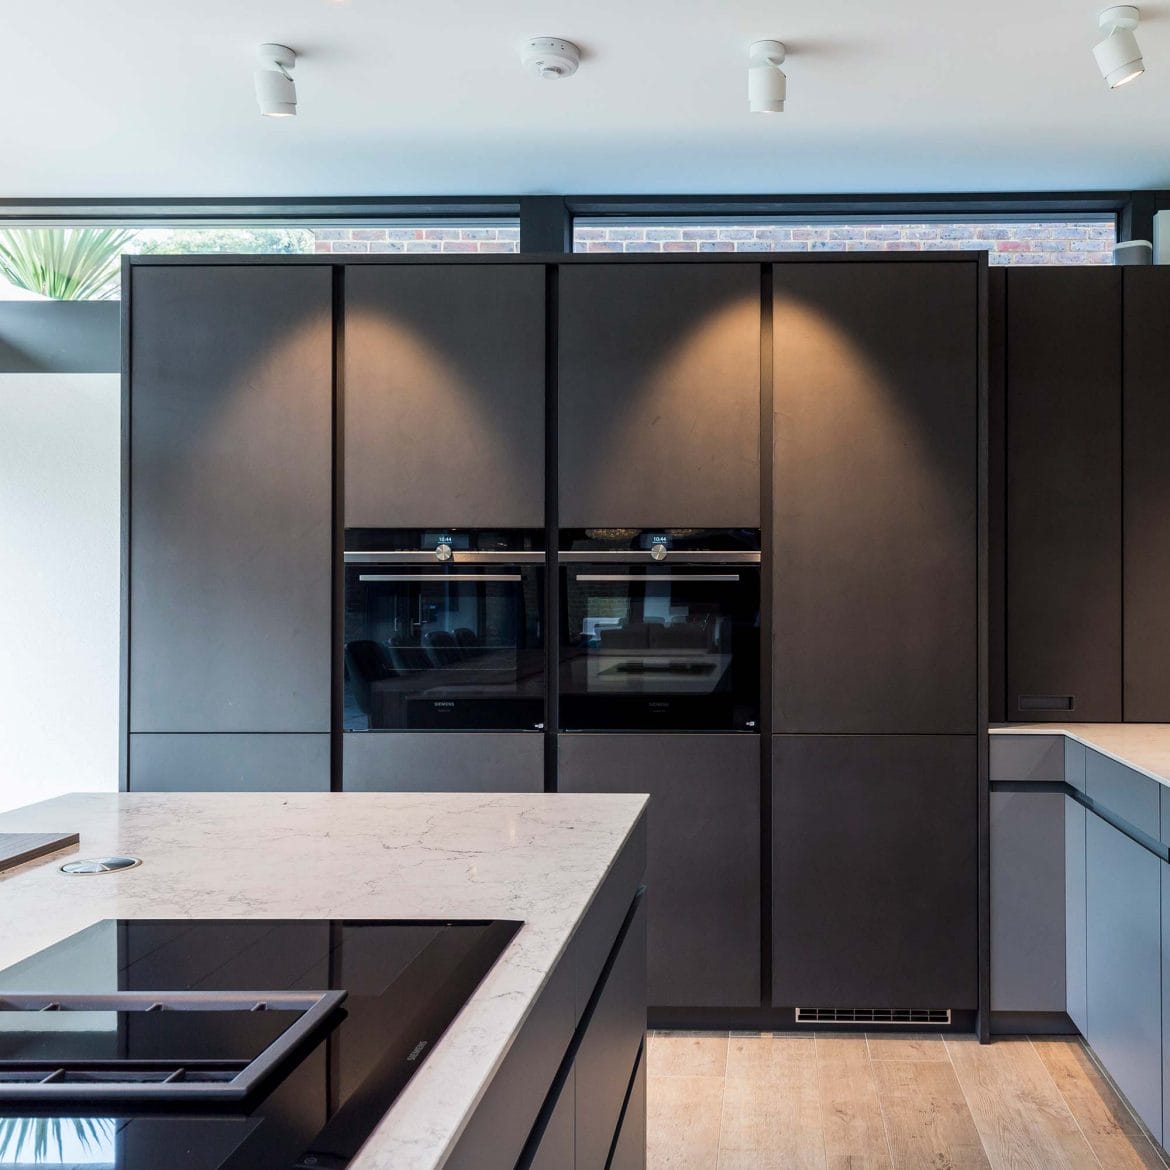 Vertical designer kitchen handle systems from Hubble